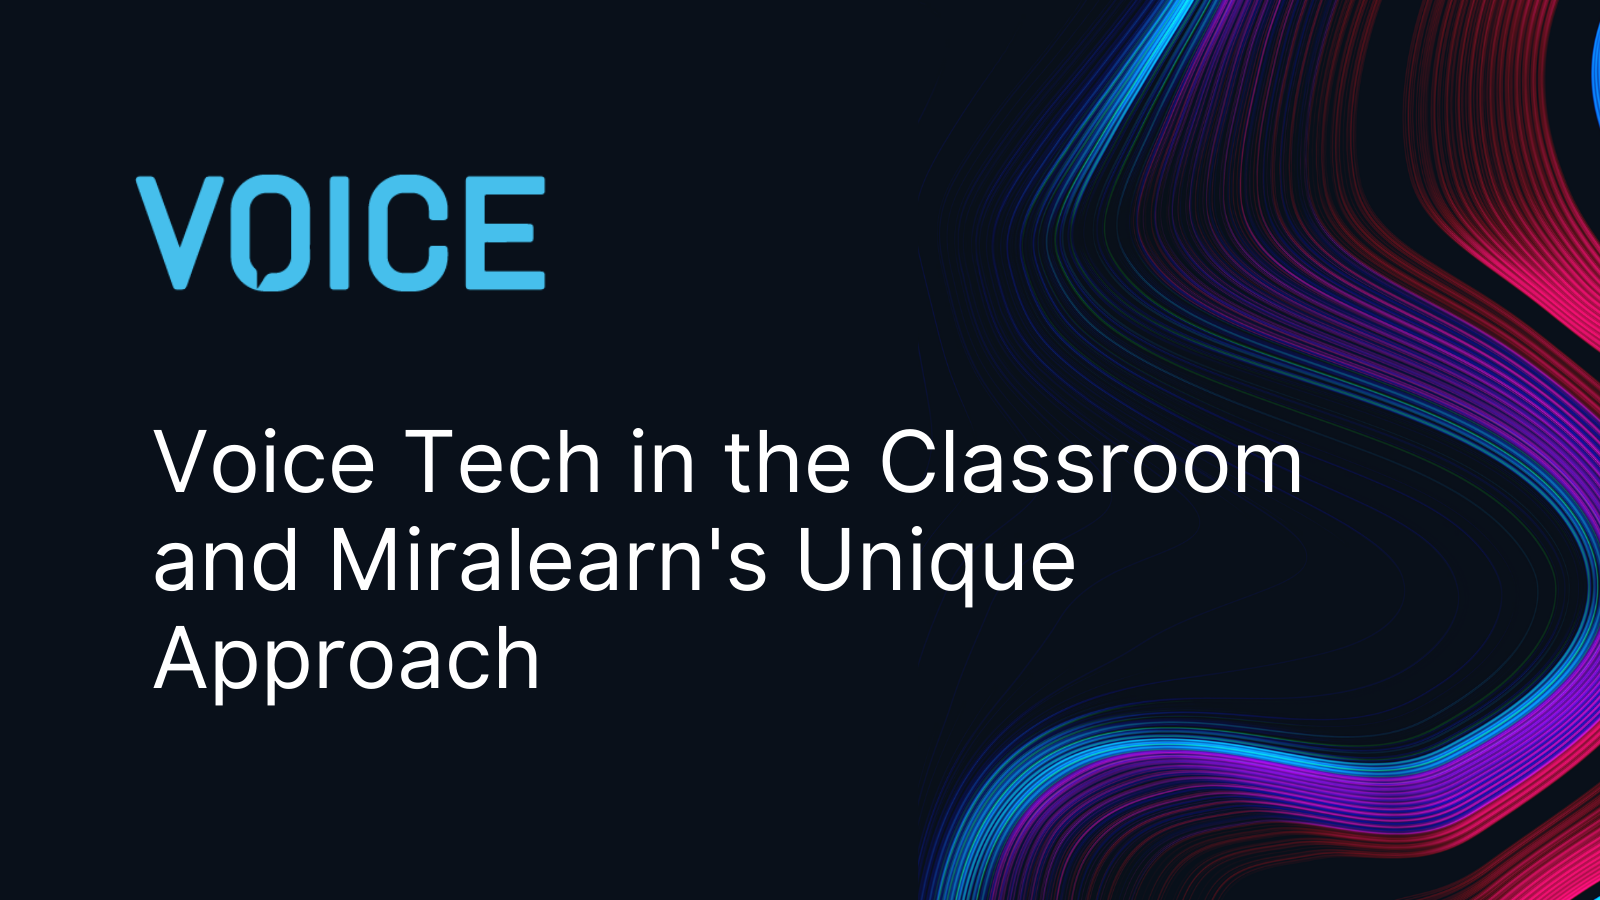 Voice Tech in the Classroom and Miralearn's Unique Approach